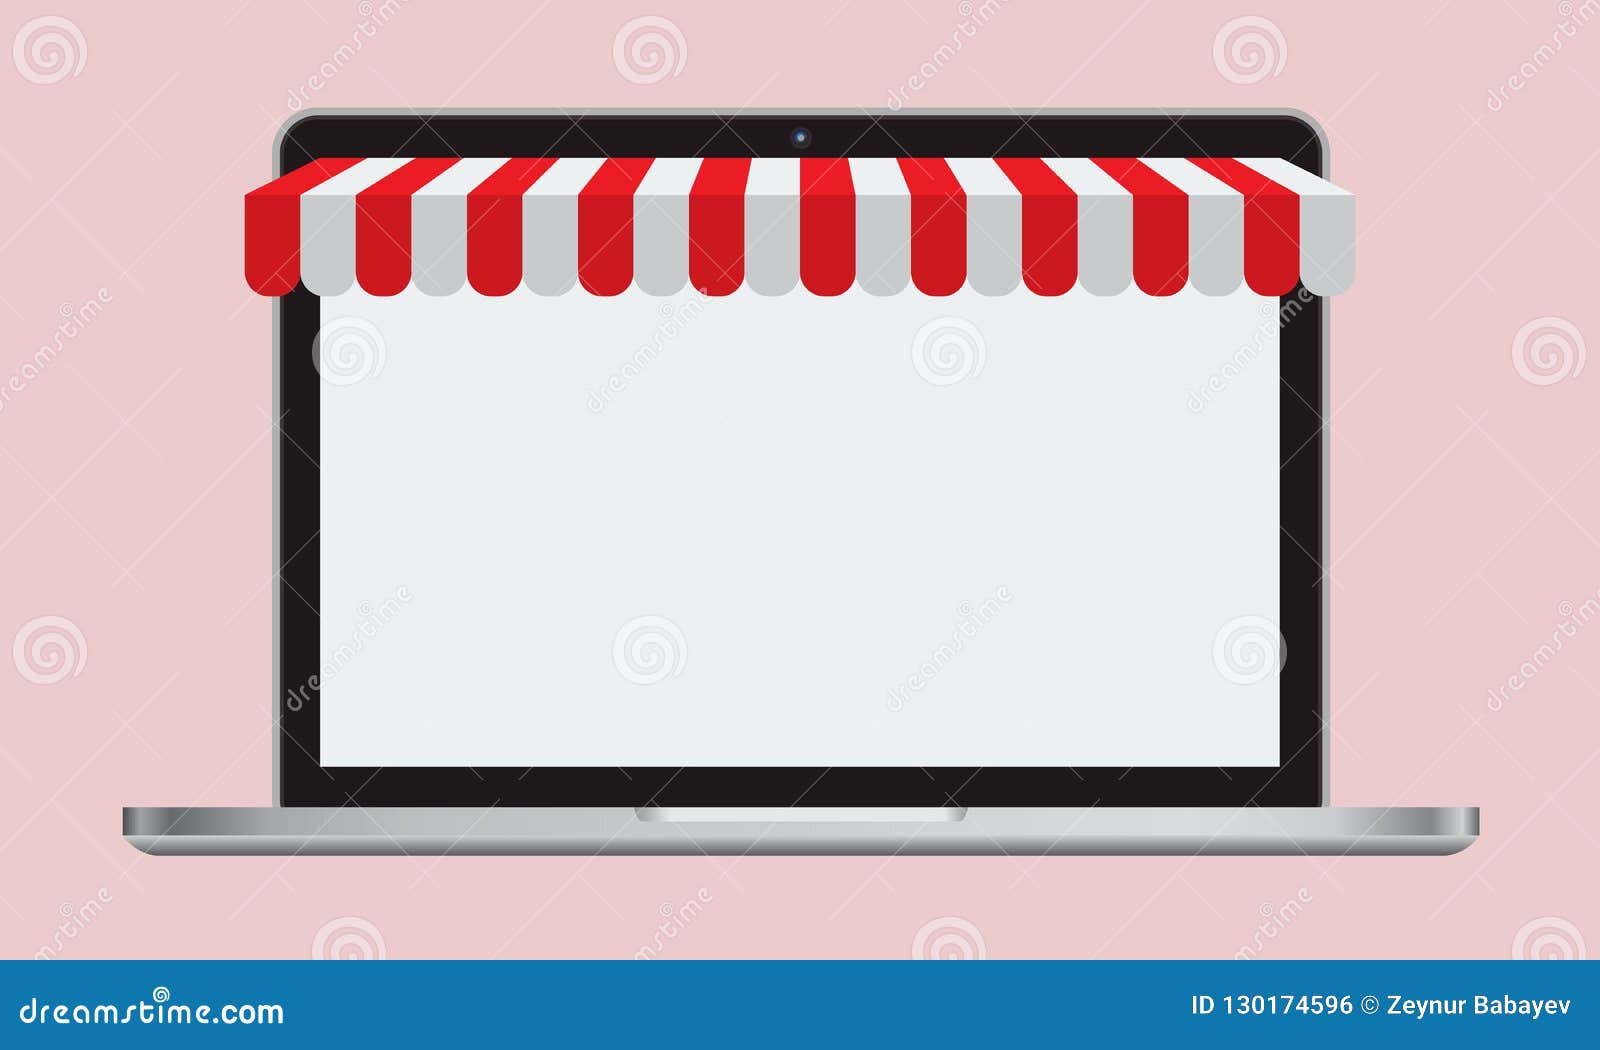 Download Realistic Laptop Mockup With Striped Awning And Empty Screen. Online Shopping Concept. Vector ...